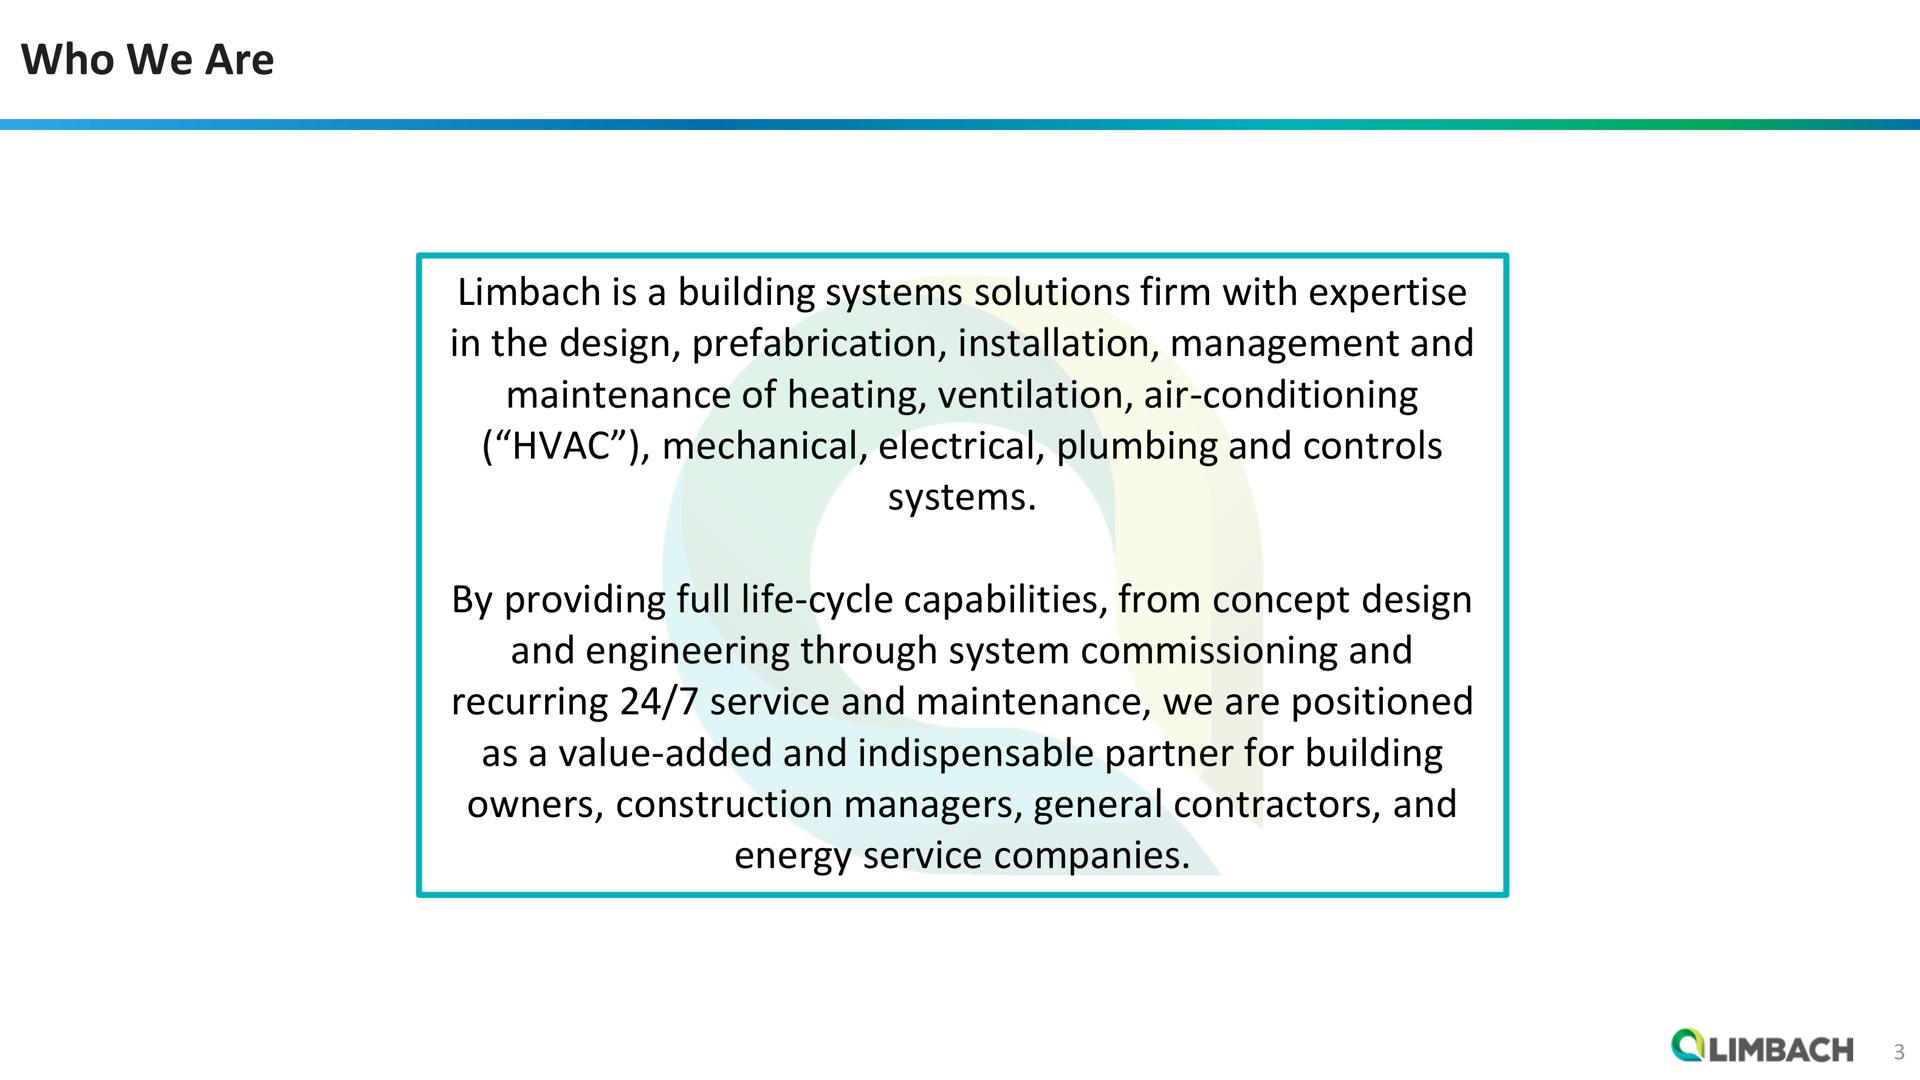 who we are is a building systems solutions firm with in the design prefabrication installation management and maintenance of heating ventilation air conditioning mechanical electrical plumbing and controls systems by providing full life cycle capabilities from concept design and engineering through system commissioning and recurring service and maintenance we are positioned as a value added and indispensable partner for building owners construction managers general contractors and energy service companies | Limbach Holdings